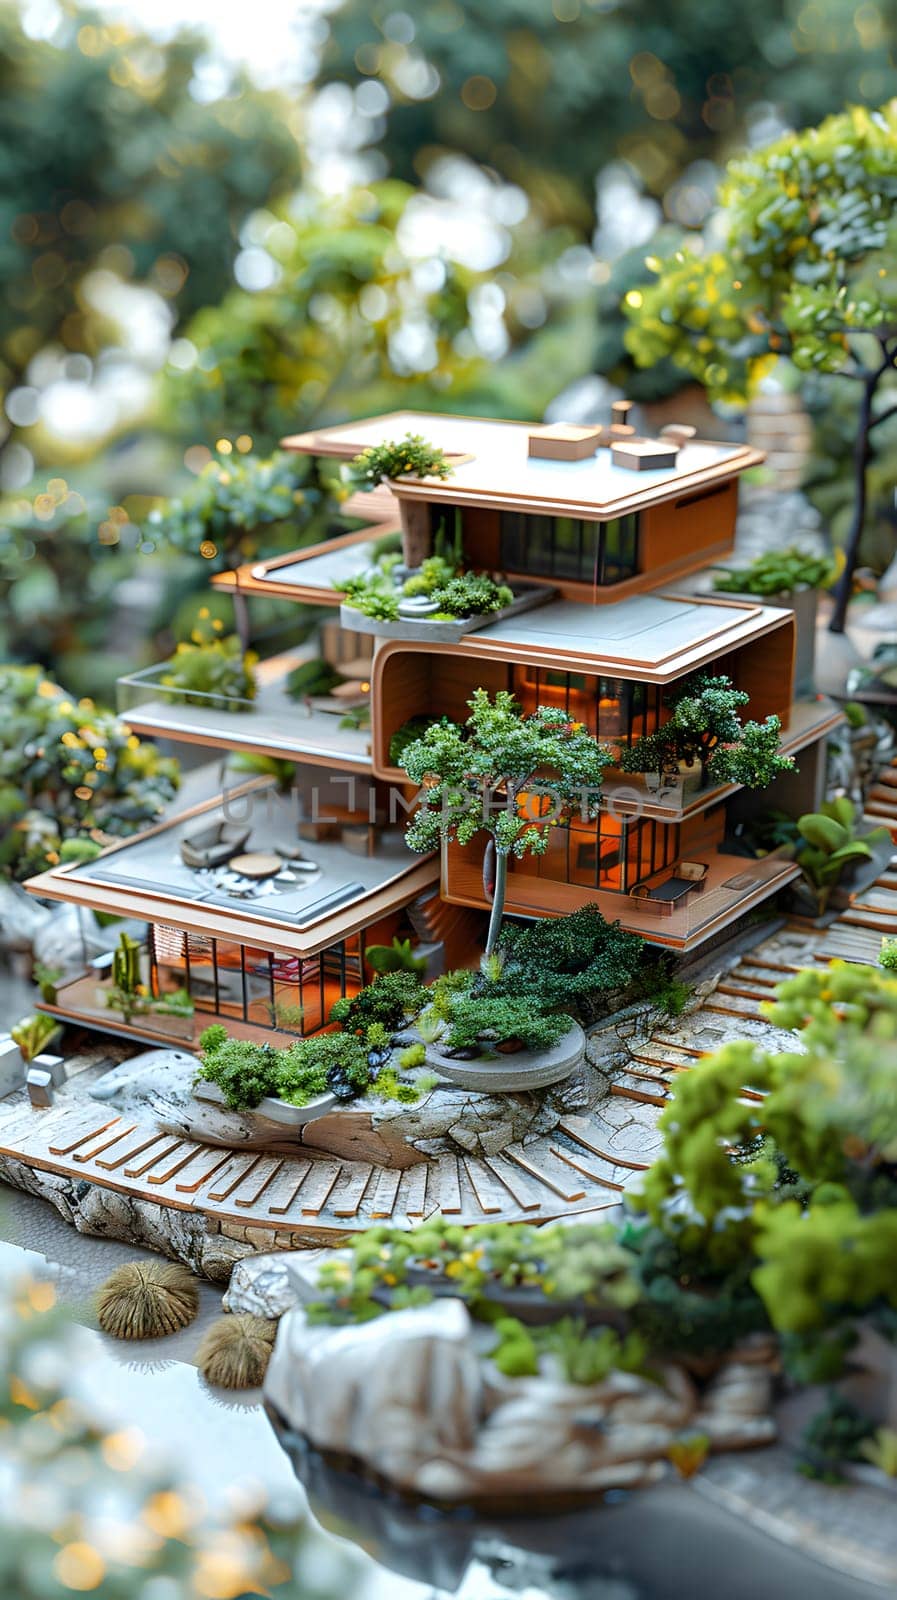 A scale model of a residential area with a building surrounded by trees and natural landscape, including terrestrial plants and a body of water